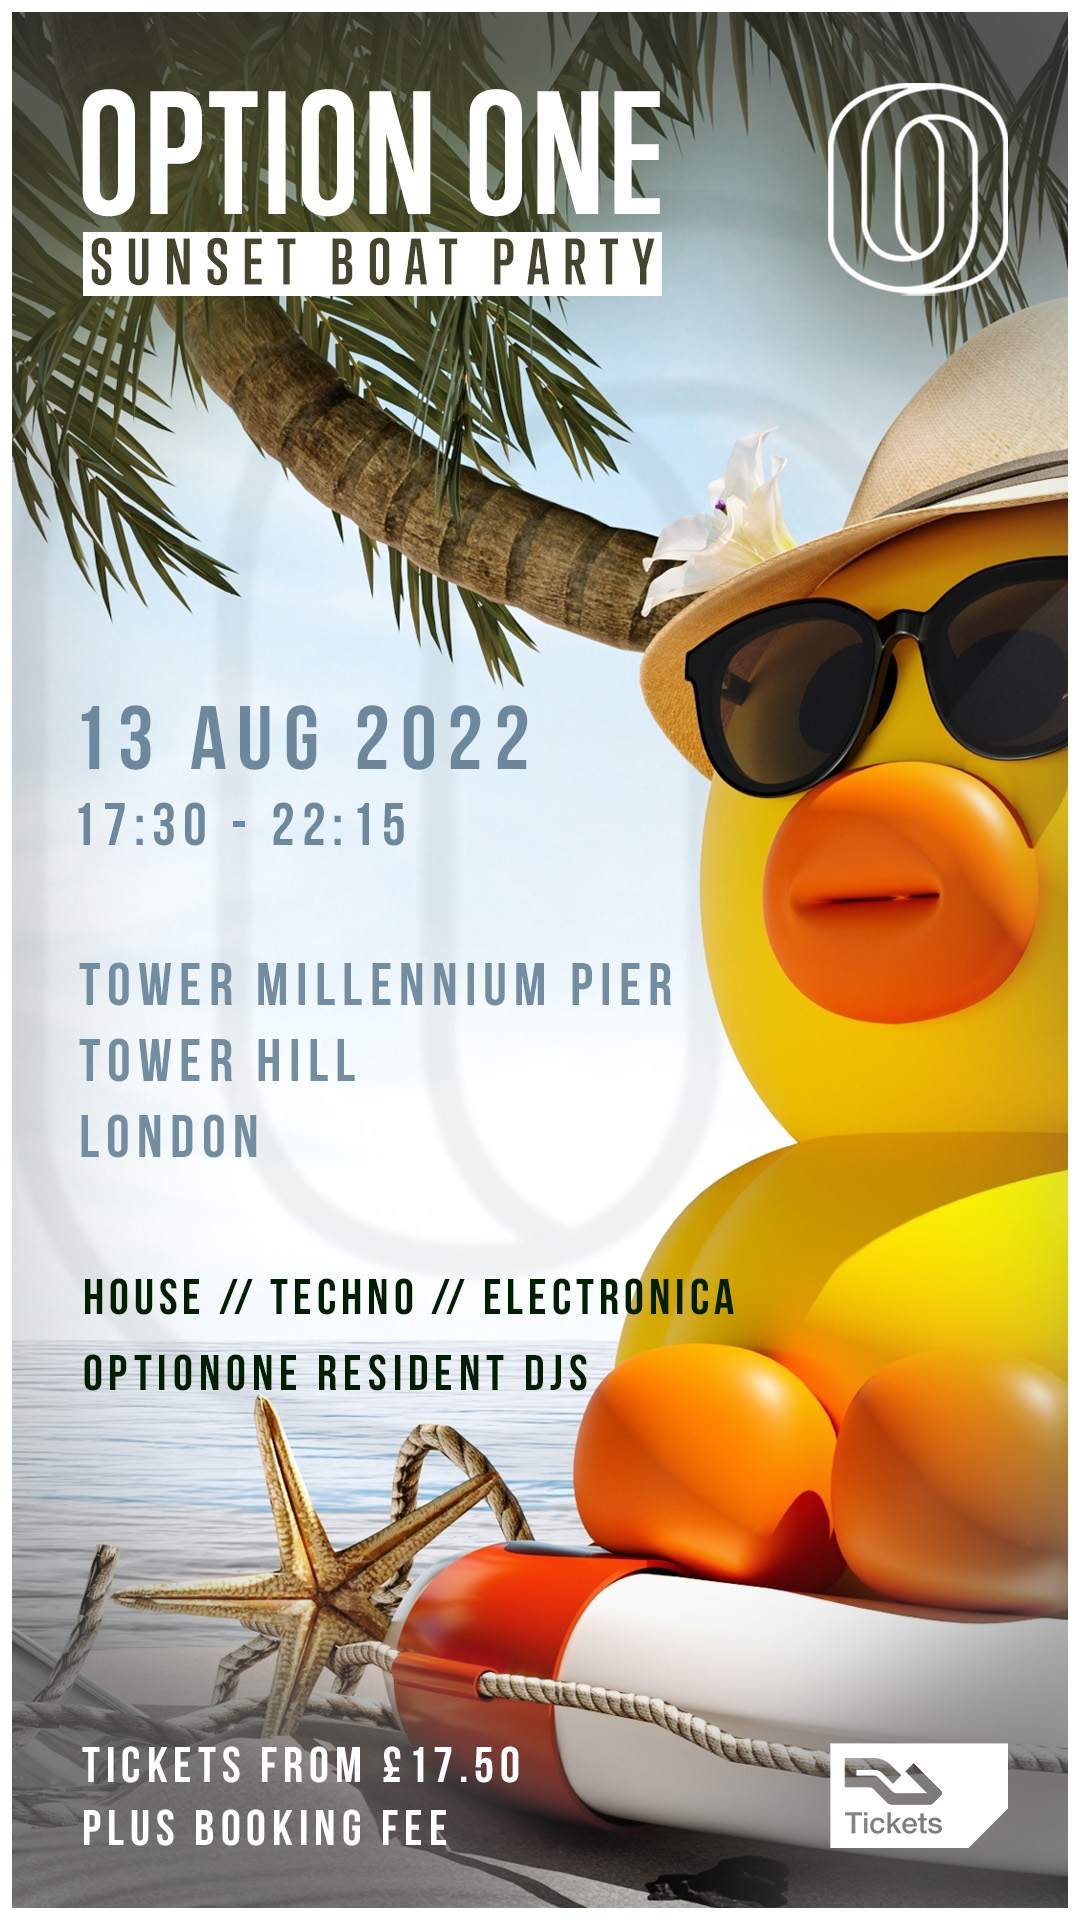 OptionOne On The Thames - Sunset Boat Party - Flyer front